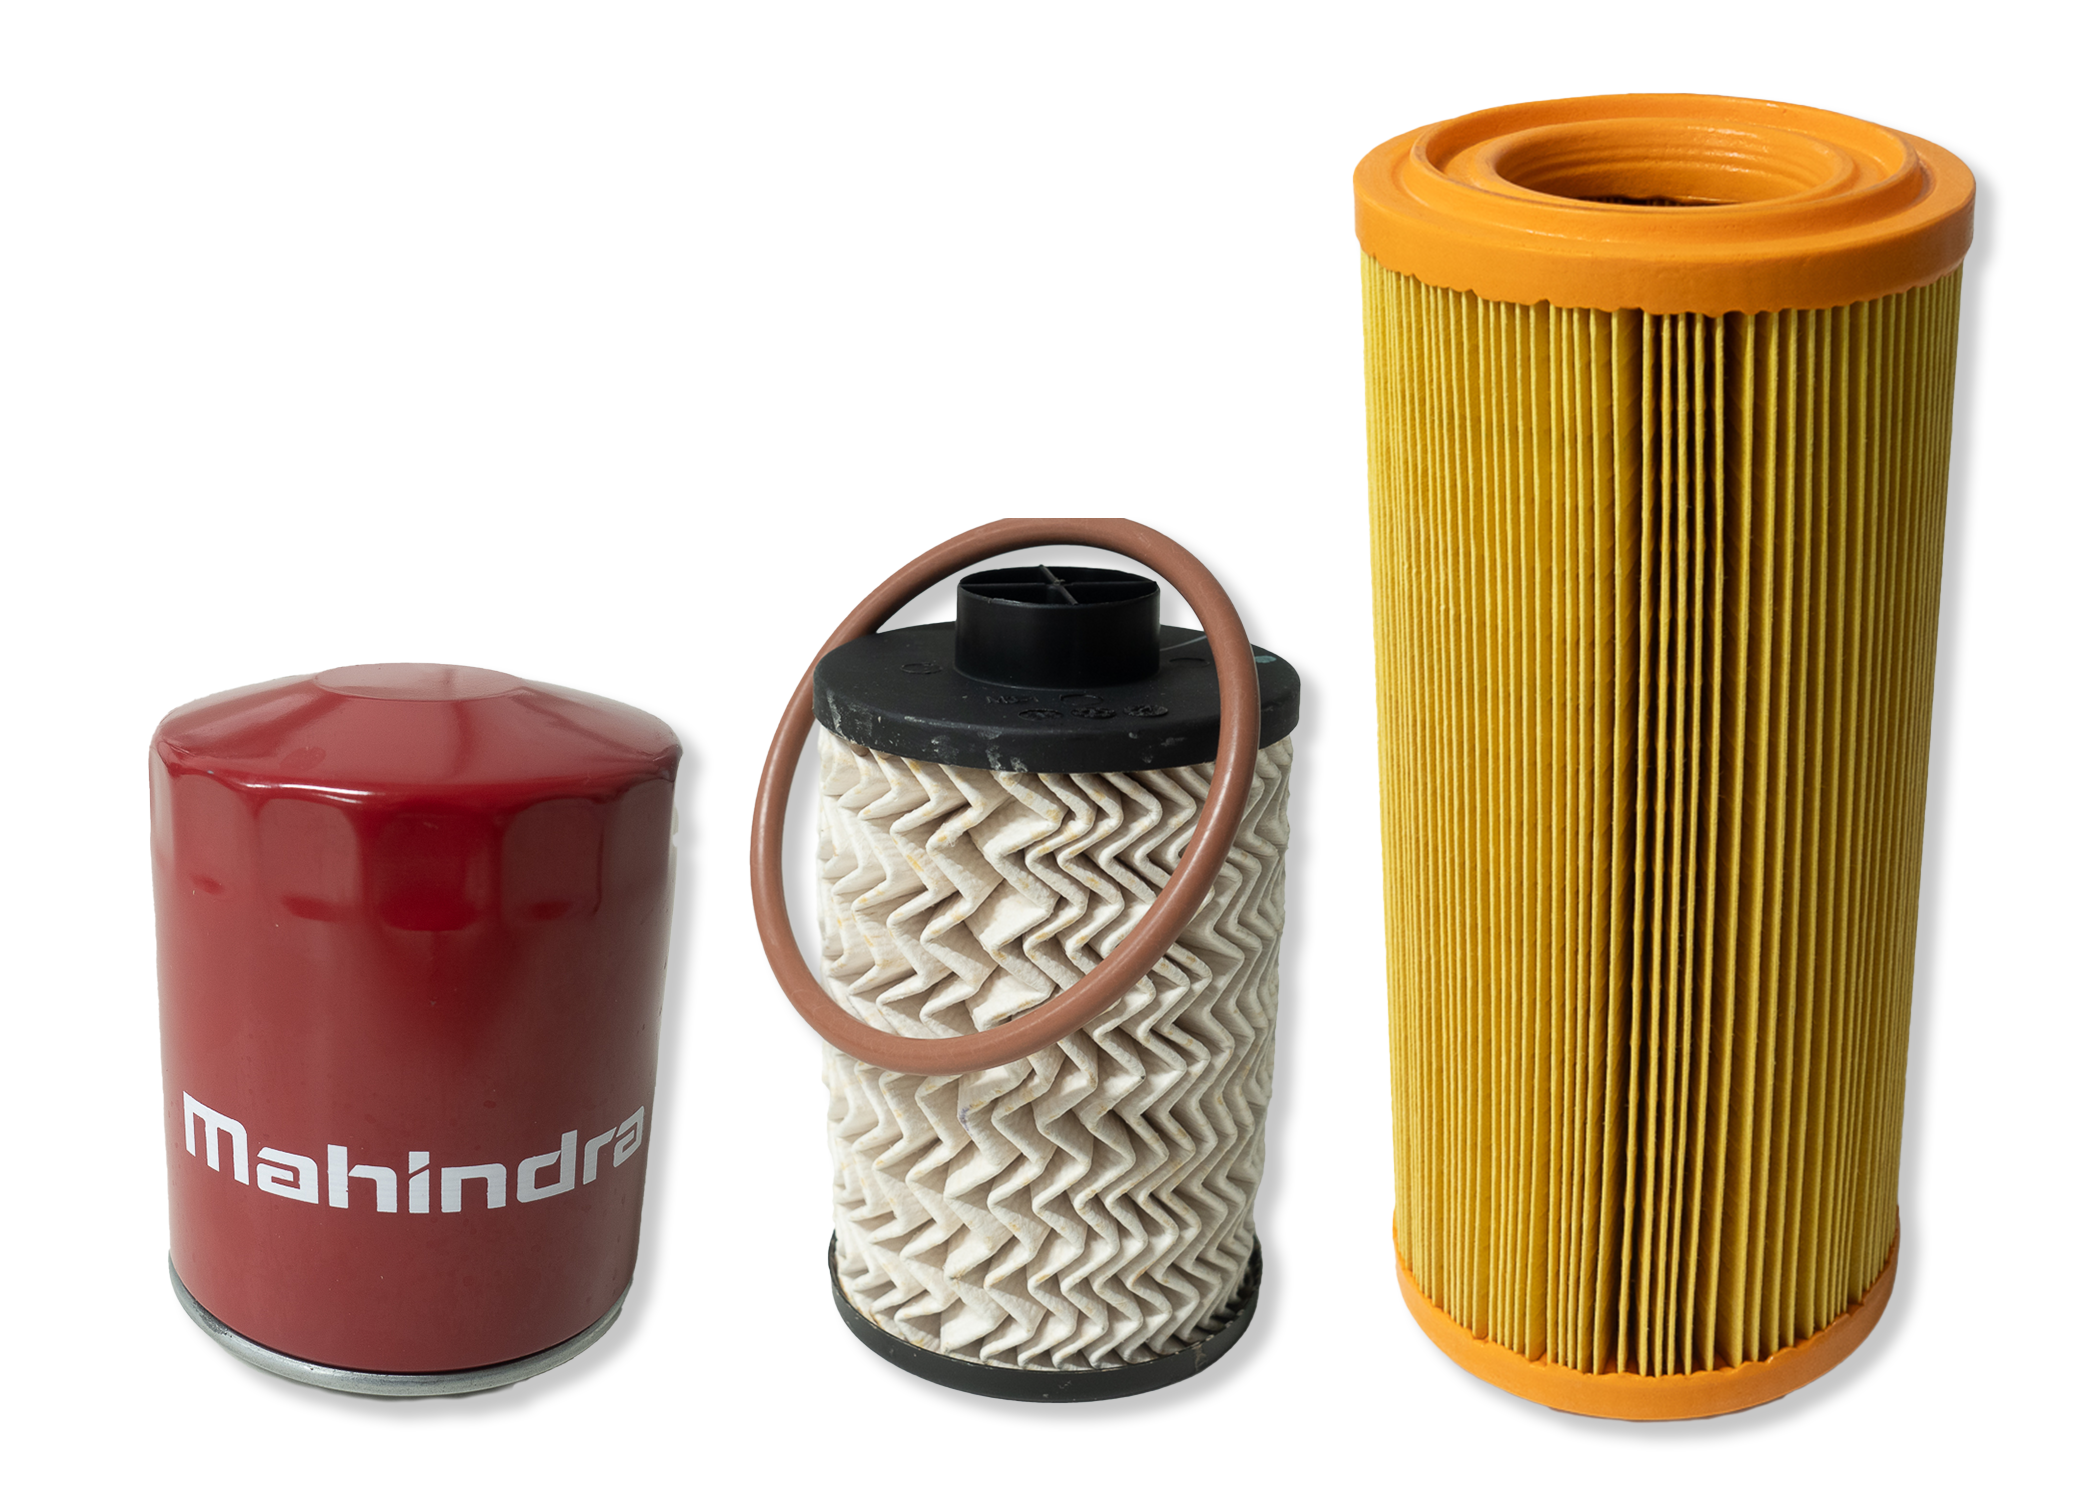 mahindra oil, fuel and air filters